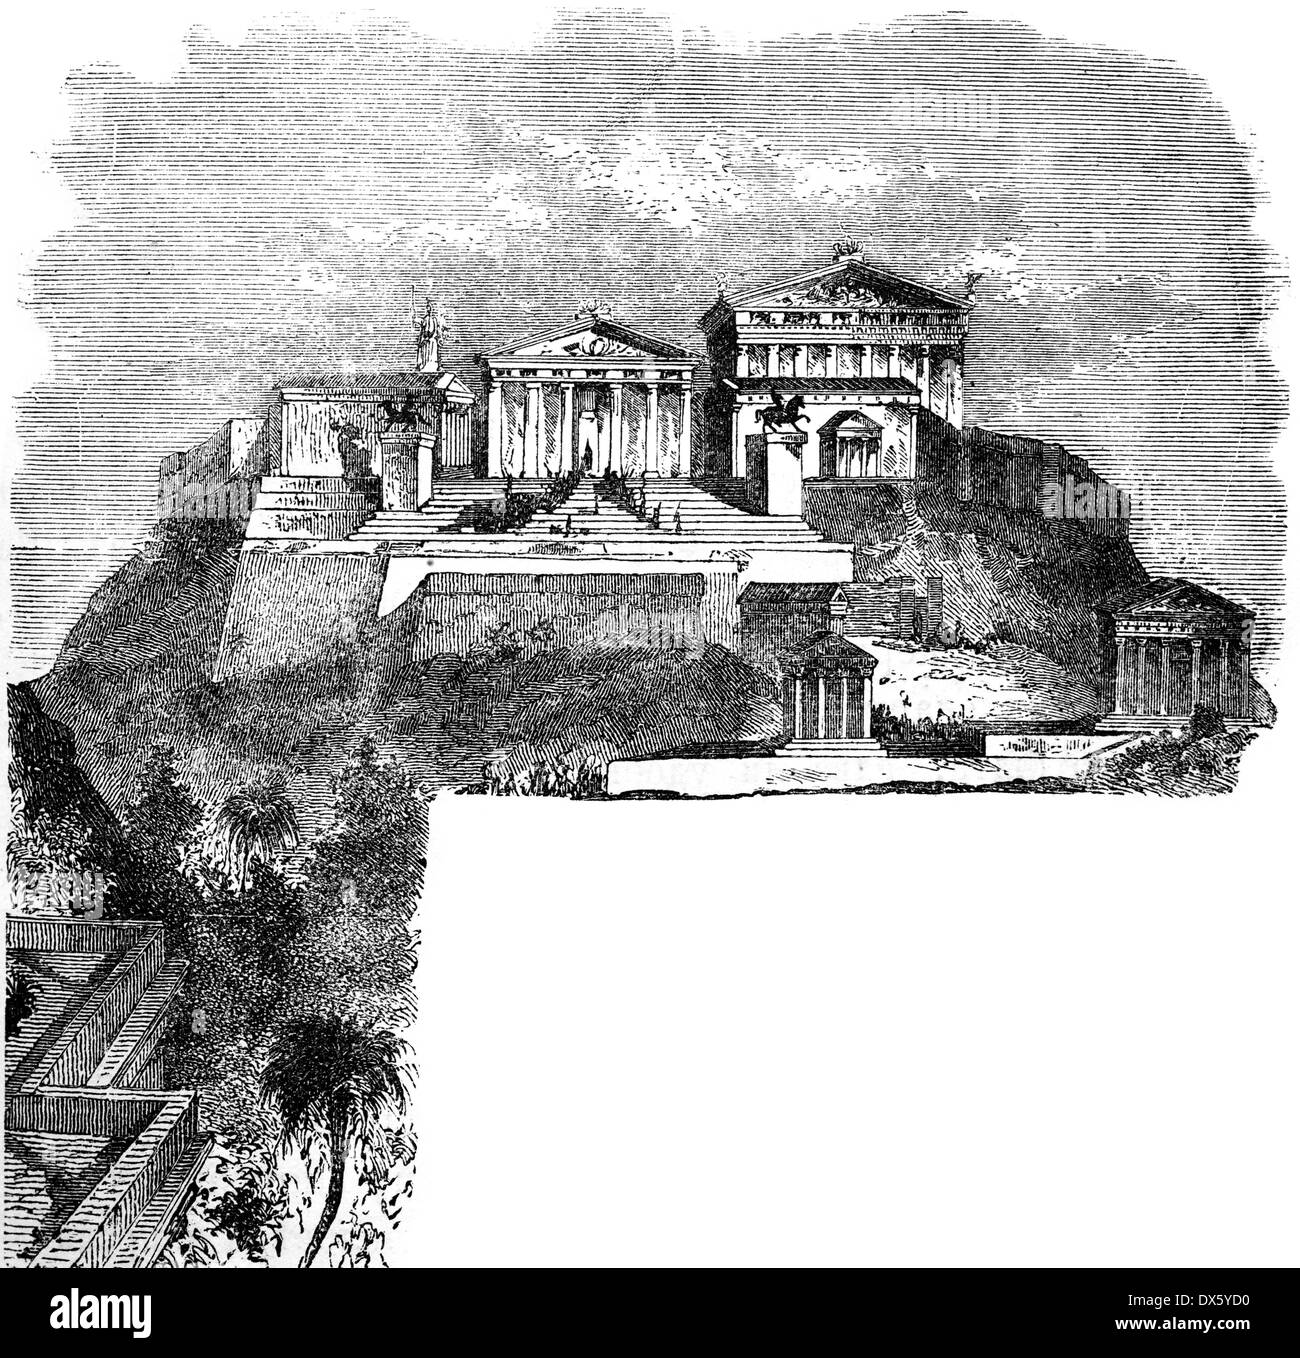 The Acropolis of Athens, temples, Greece, illustration from book dated 1878 Stock Photo